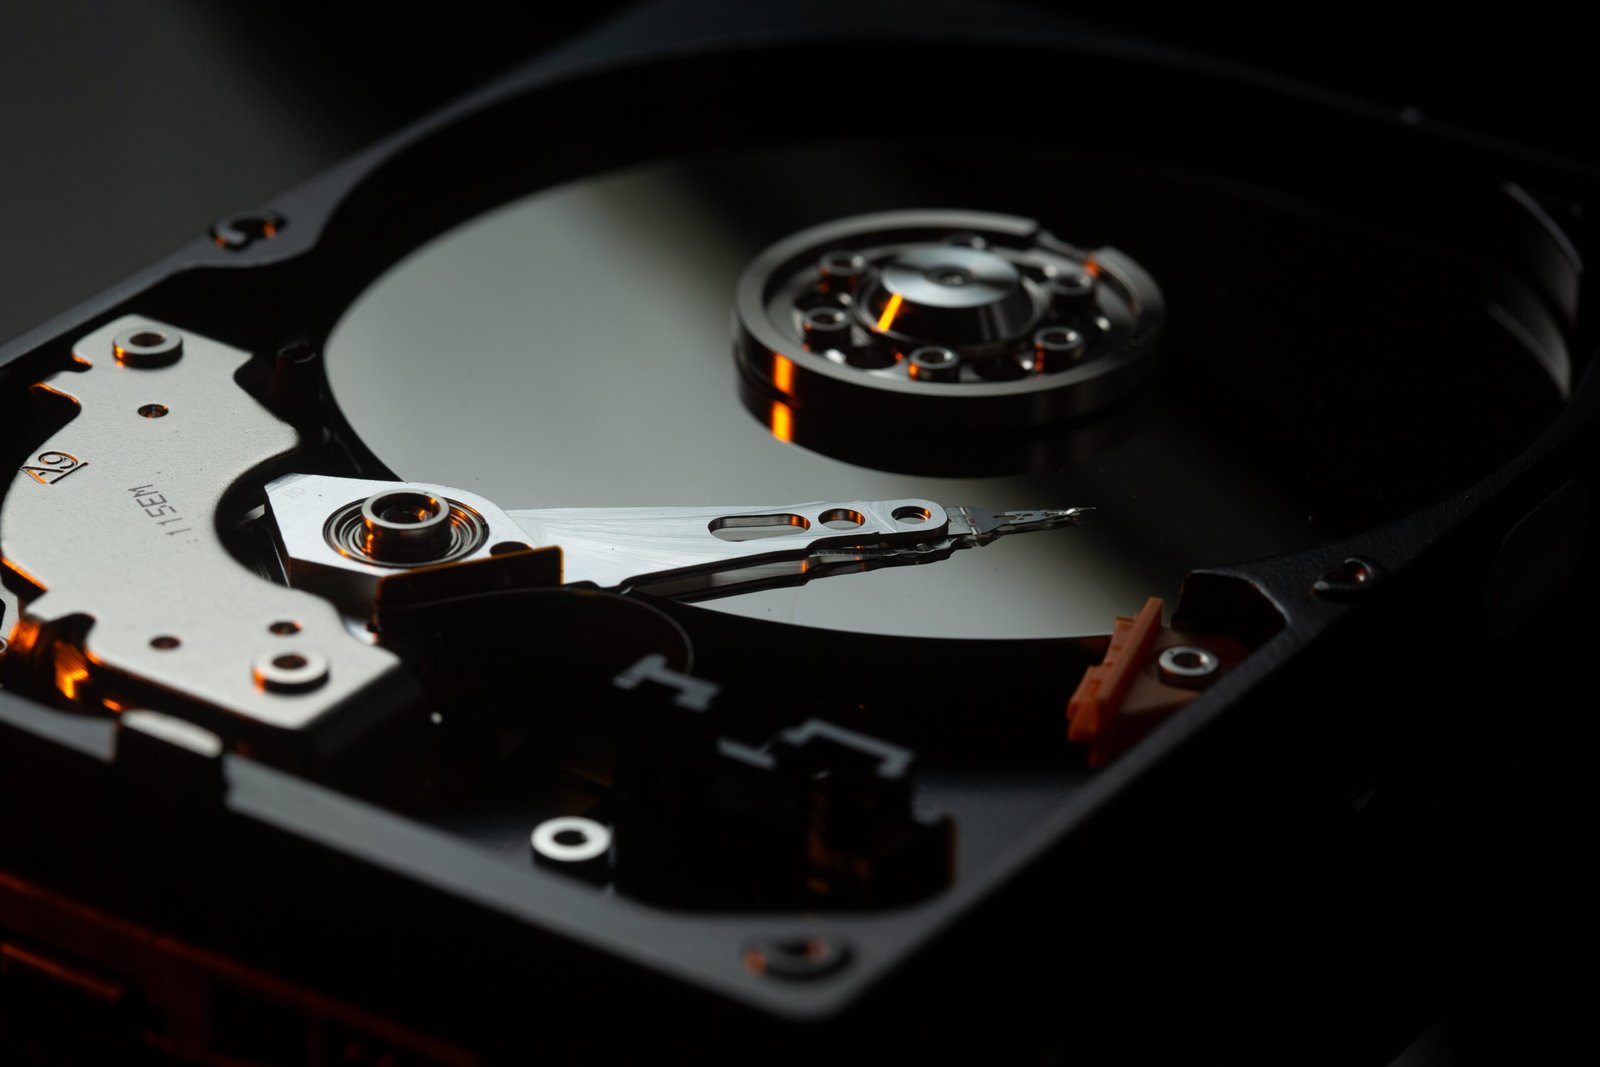 The Latest Internal Storage Drives for Laptop Computers